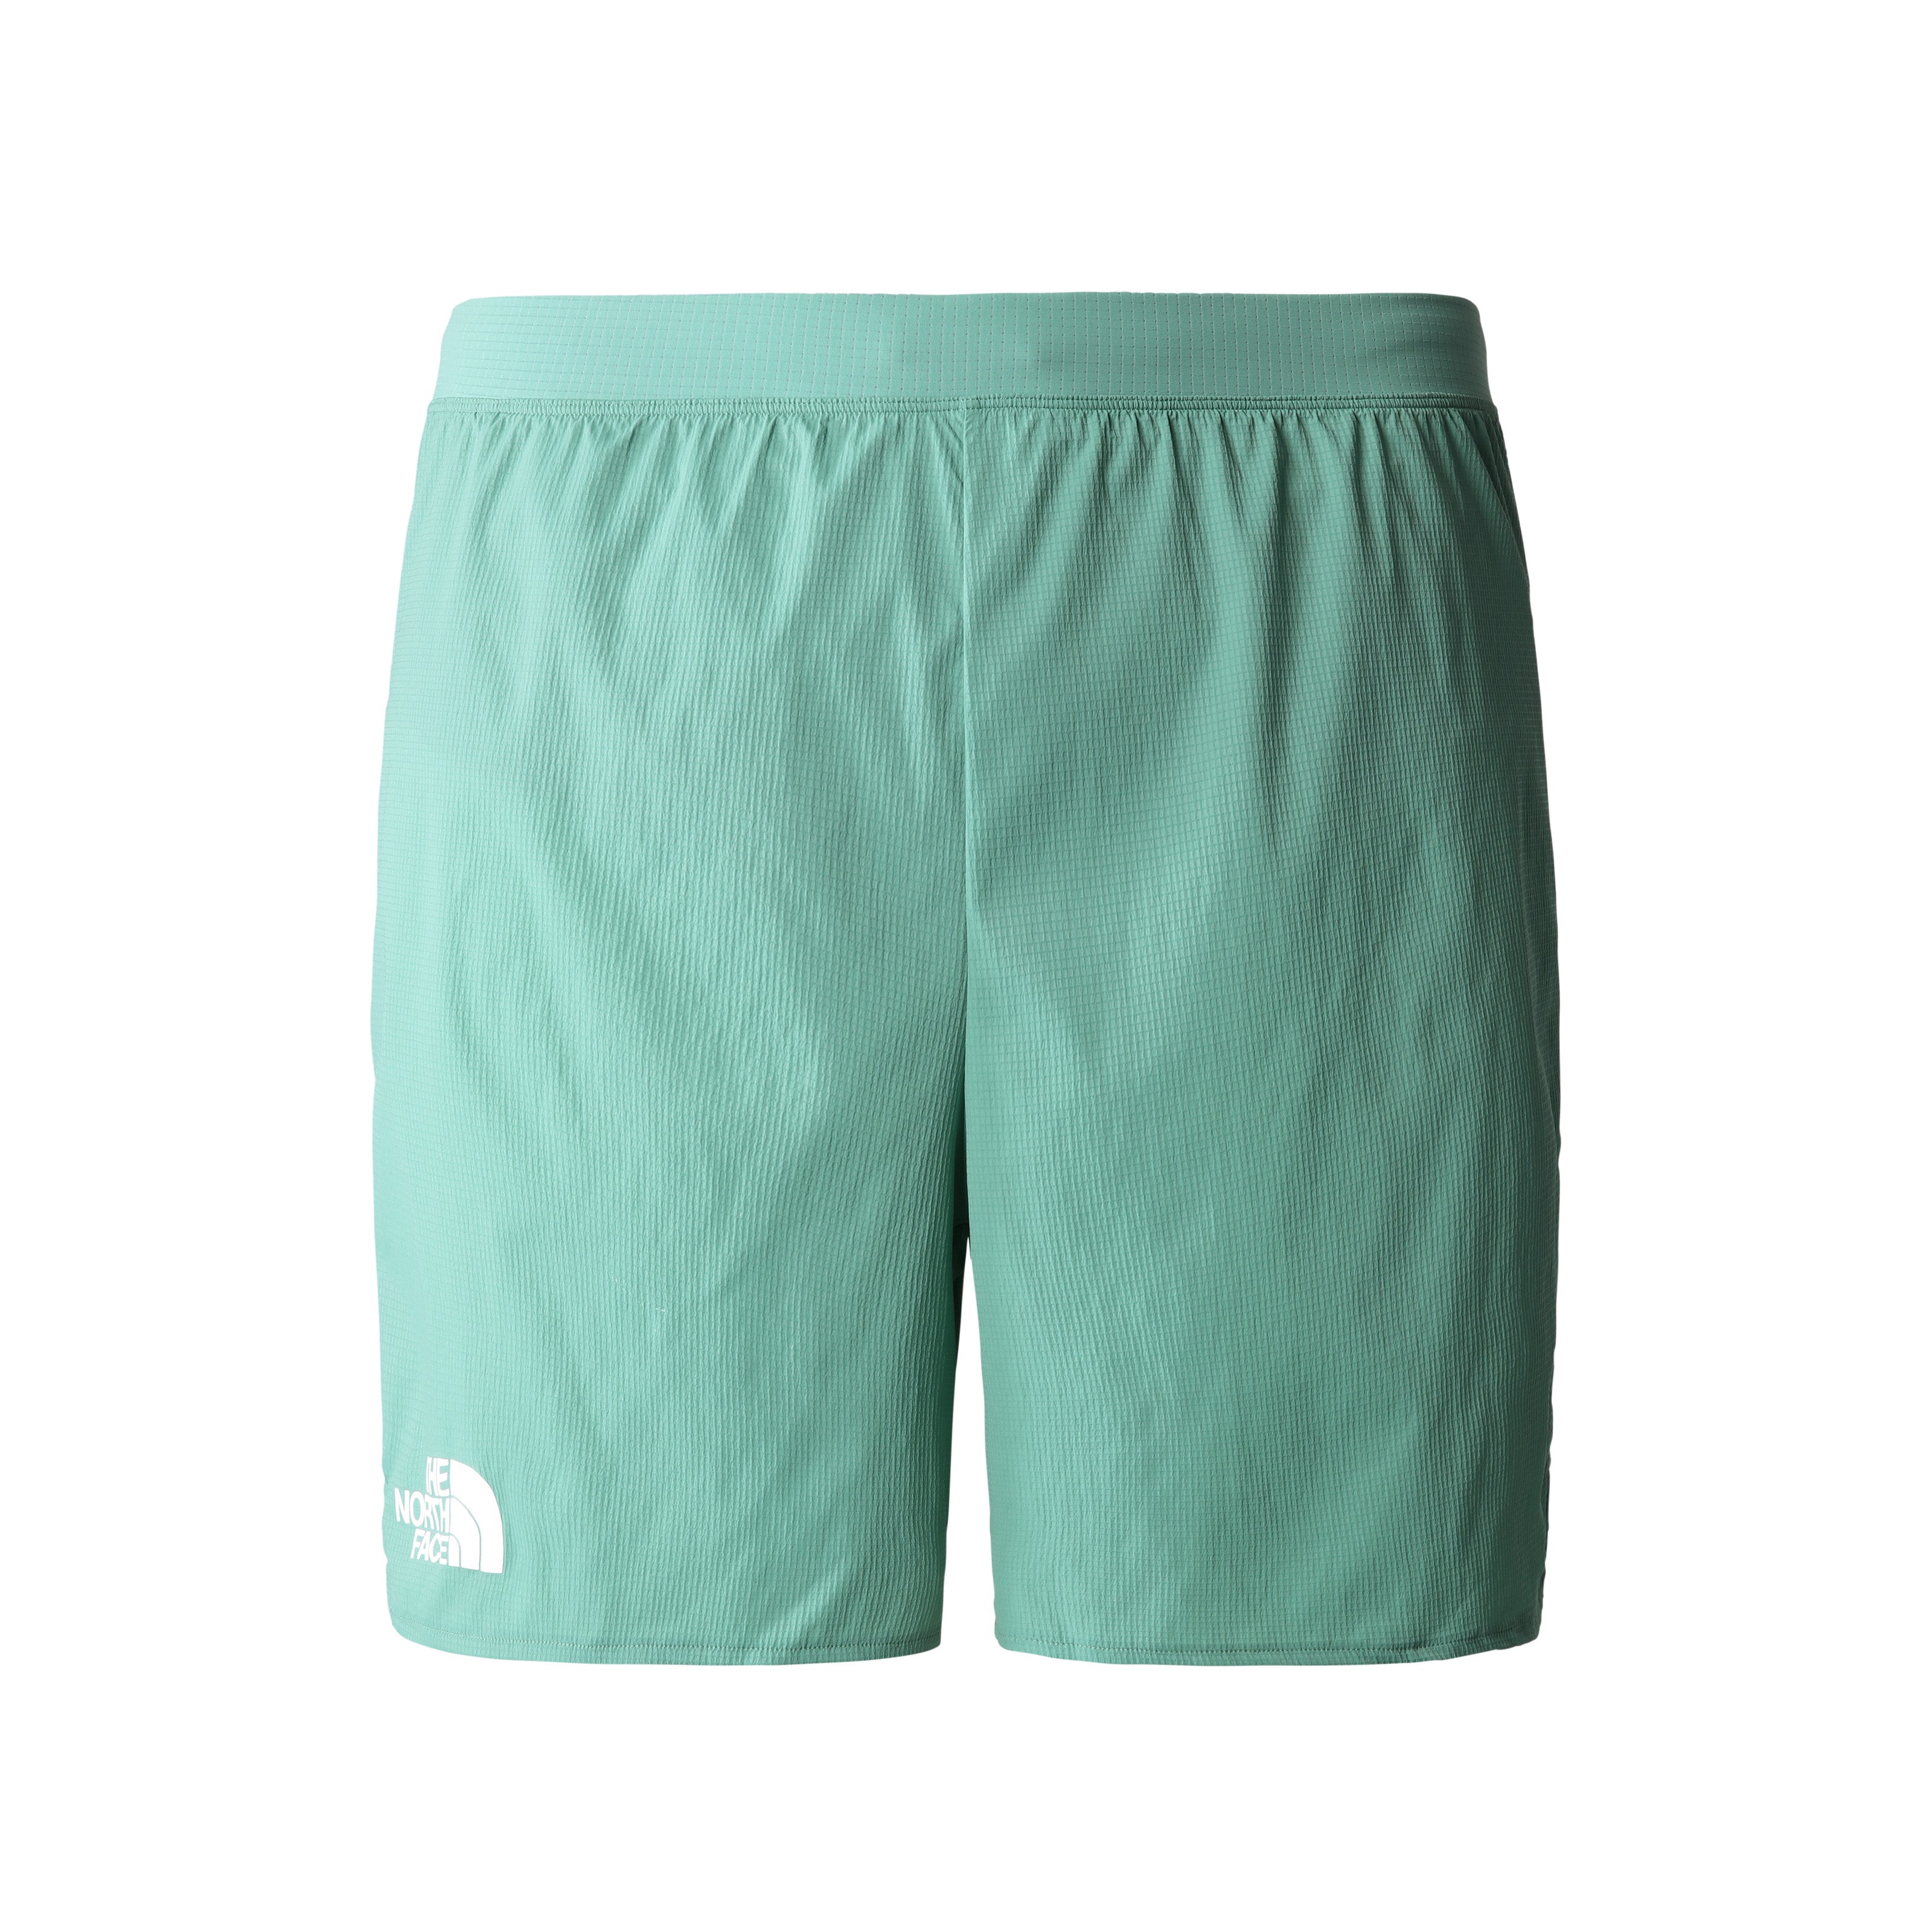 THE NORTH FACE PACESETTER RUN SHORT